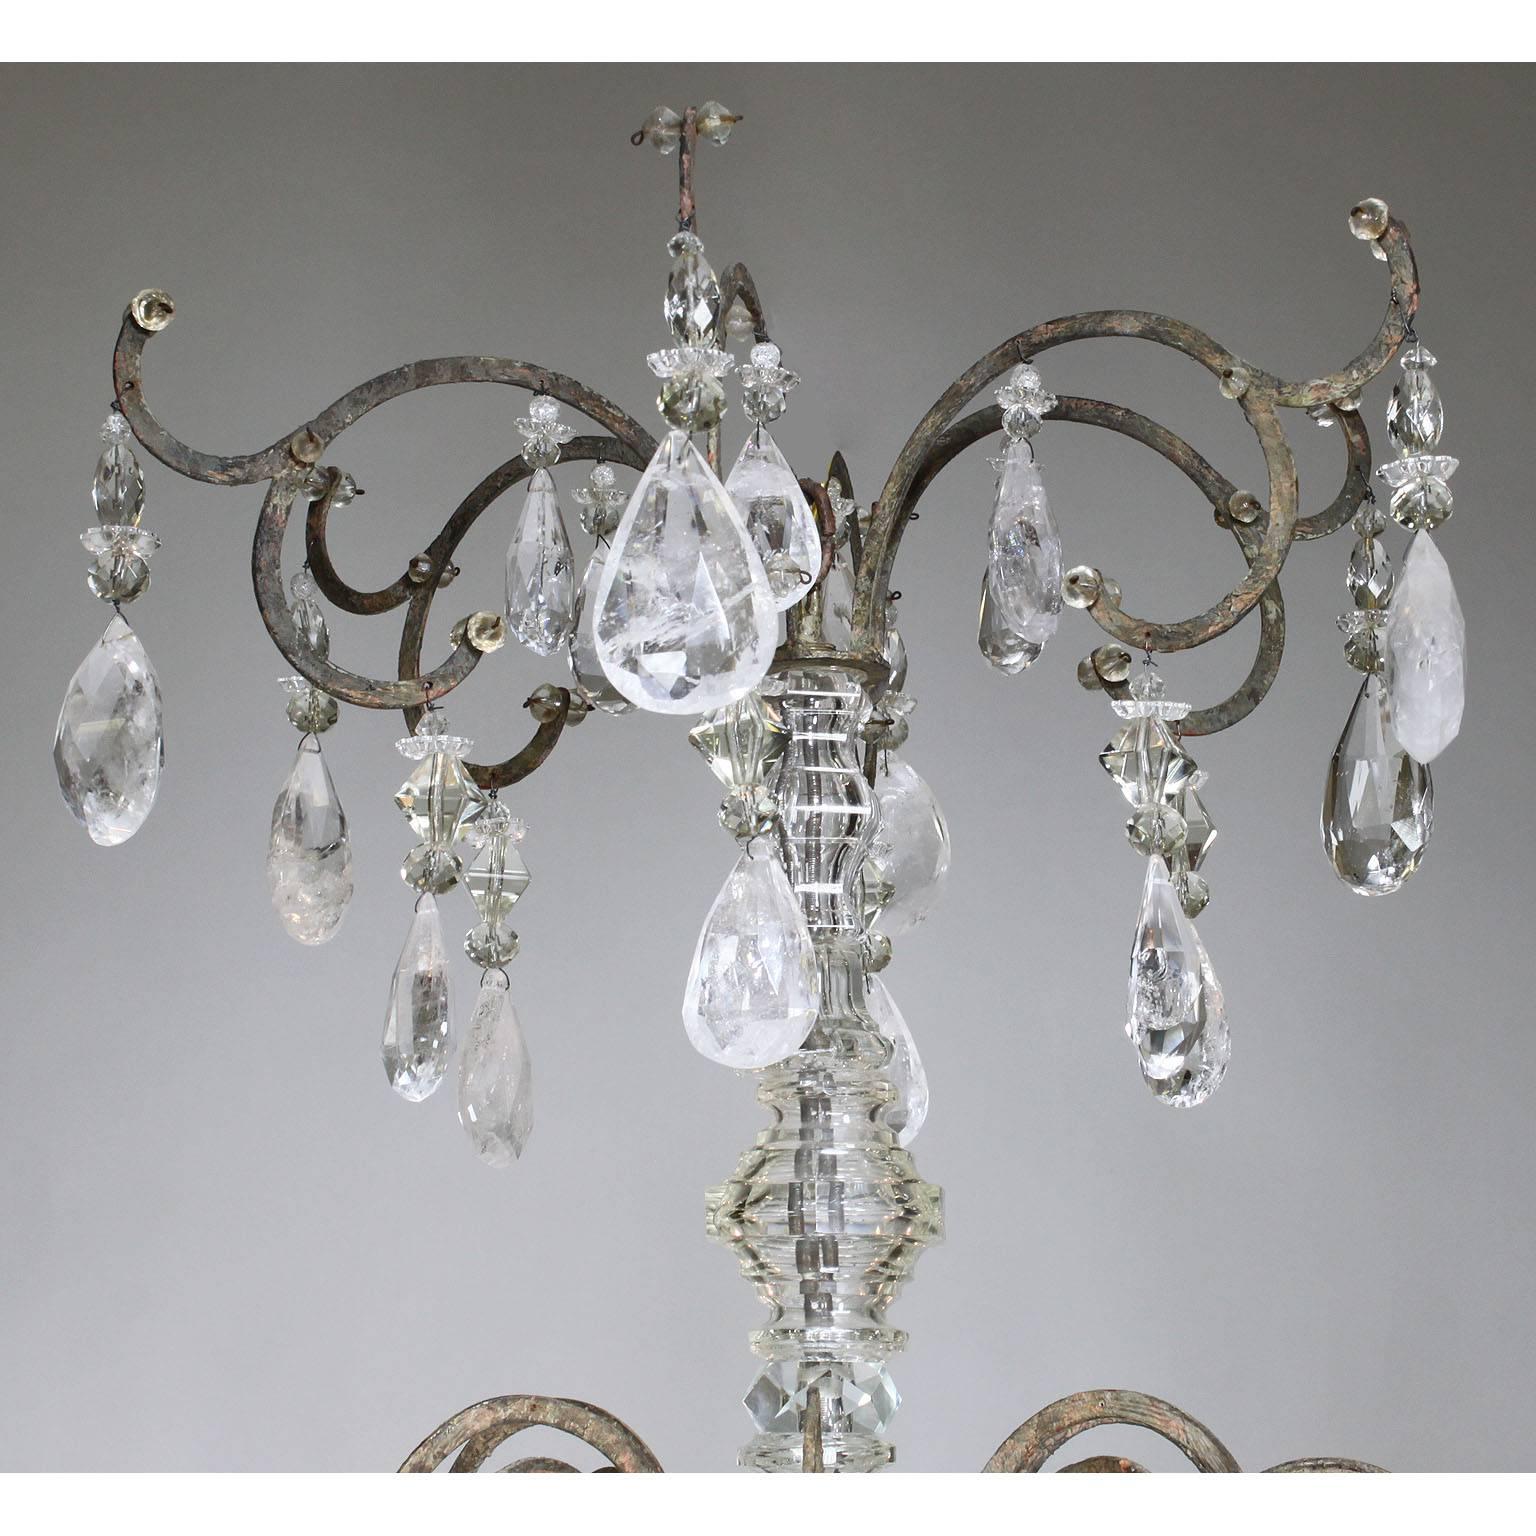 A rare French 19th-20th century Louis XV style six-light patinated metal and rock-crystal chandelier. The thin metal frame surmounted with six 